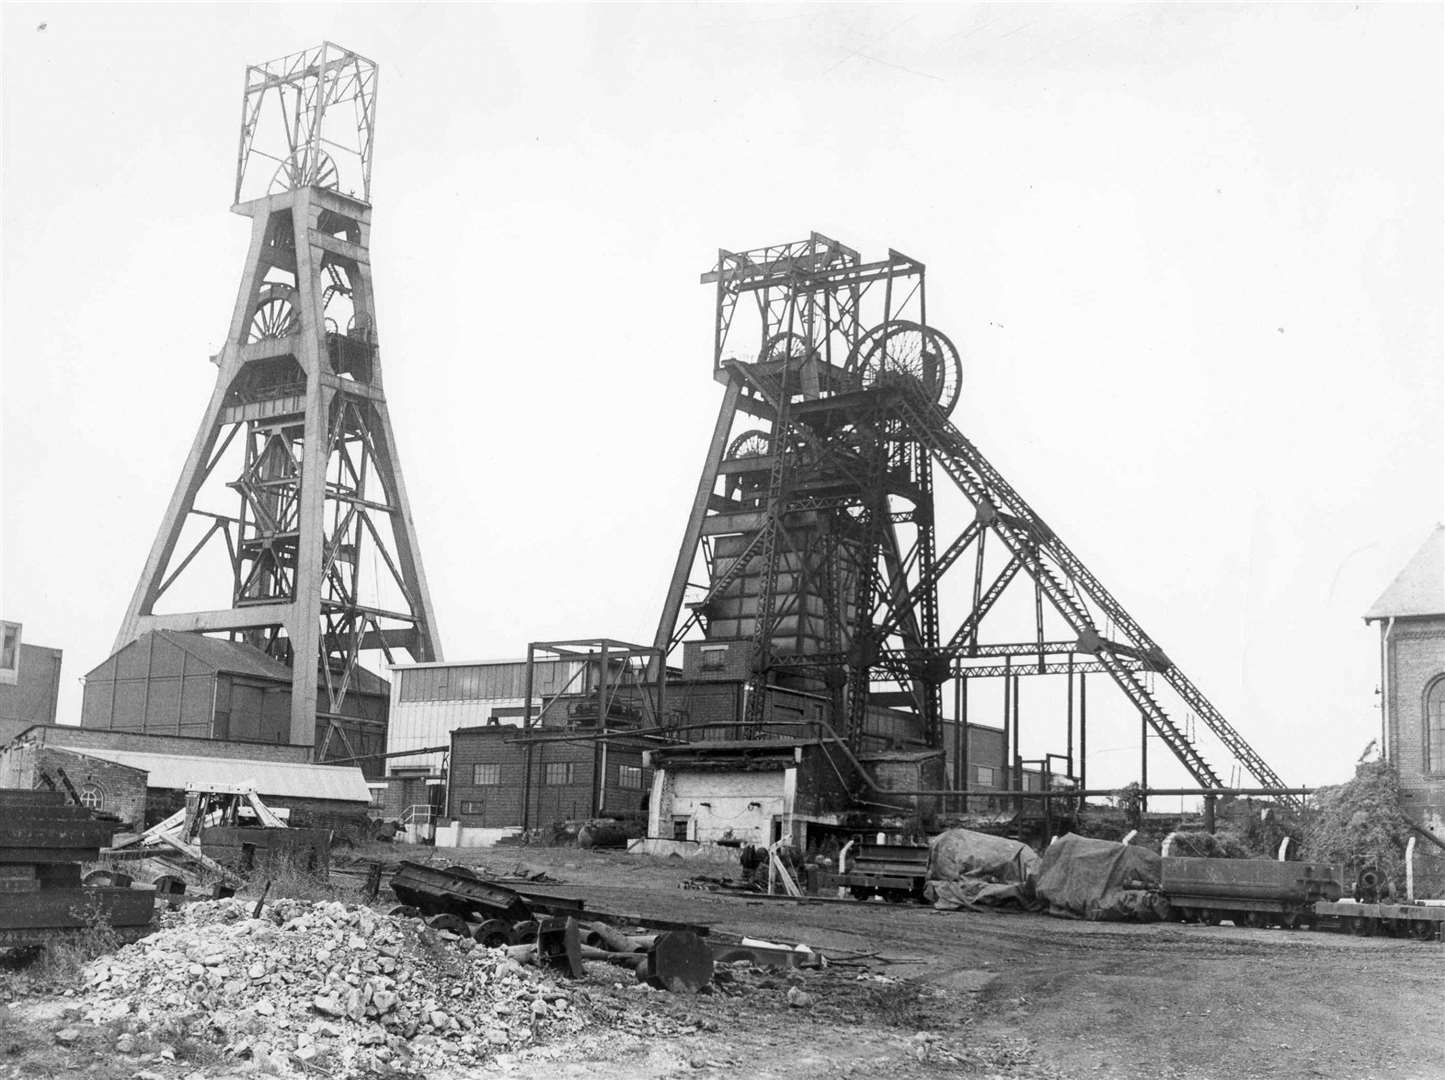 Tilmanstone Colliery pictured in 1970